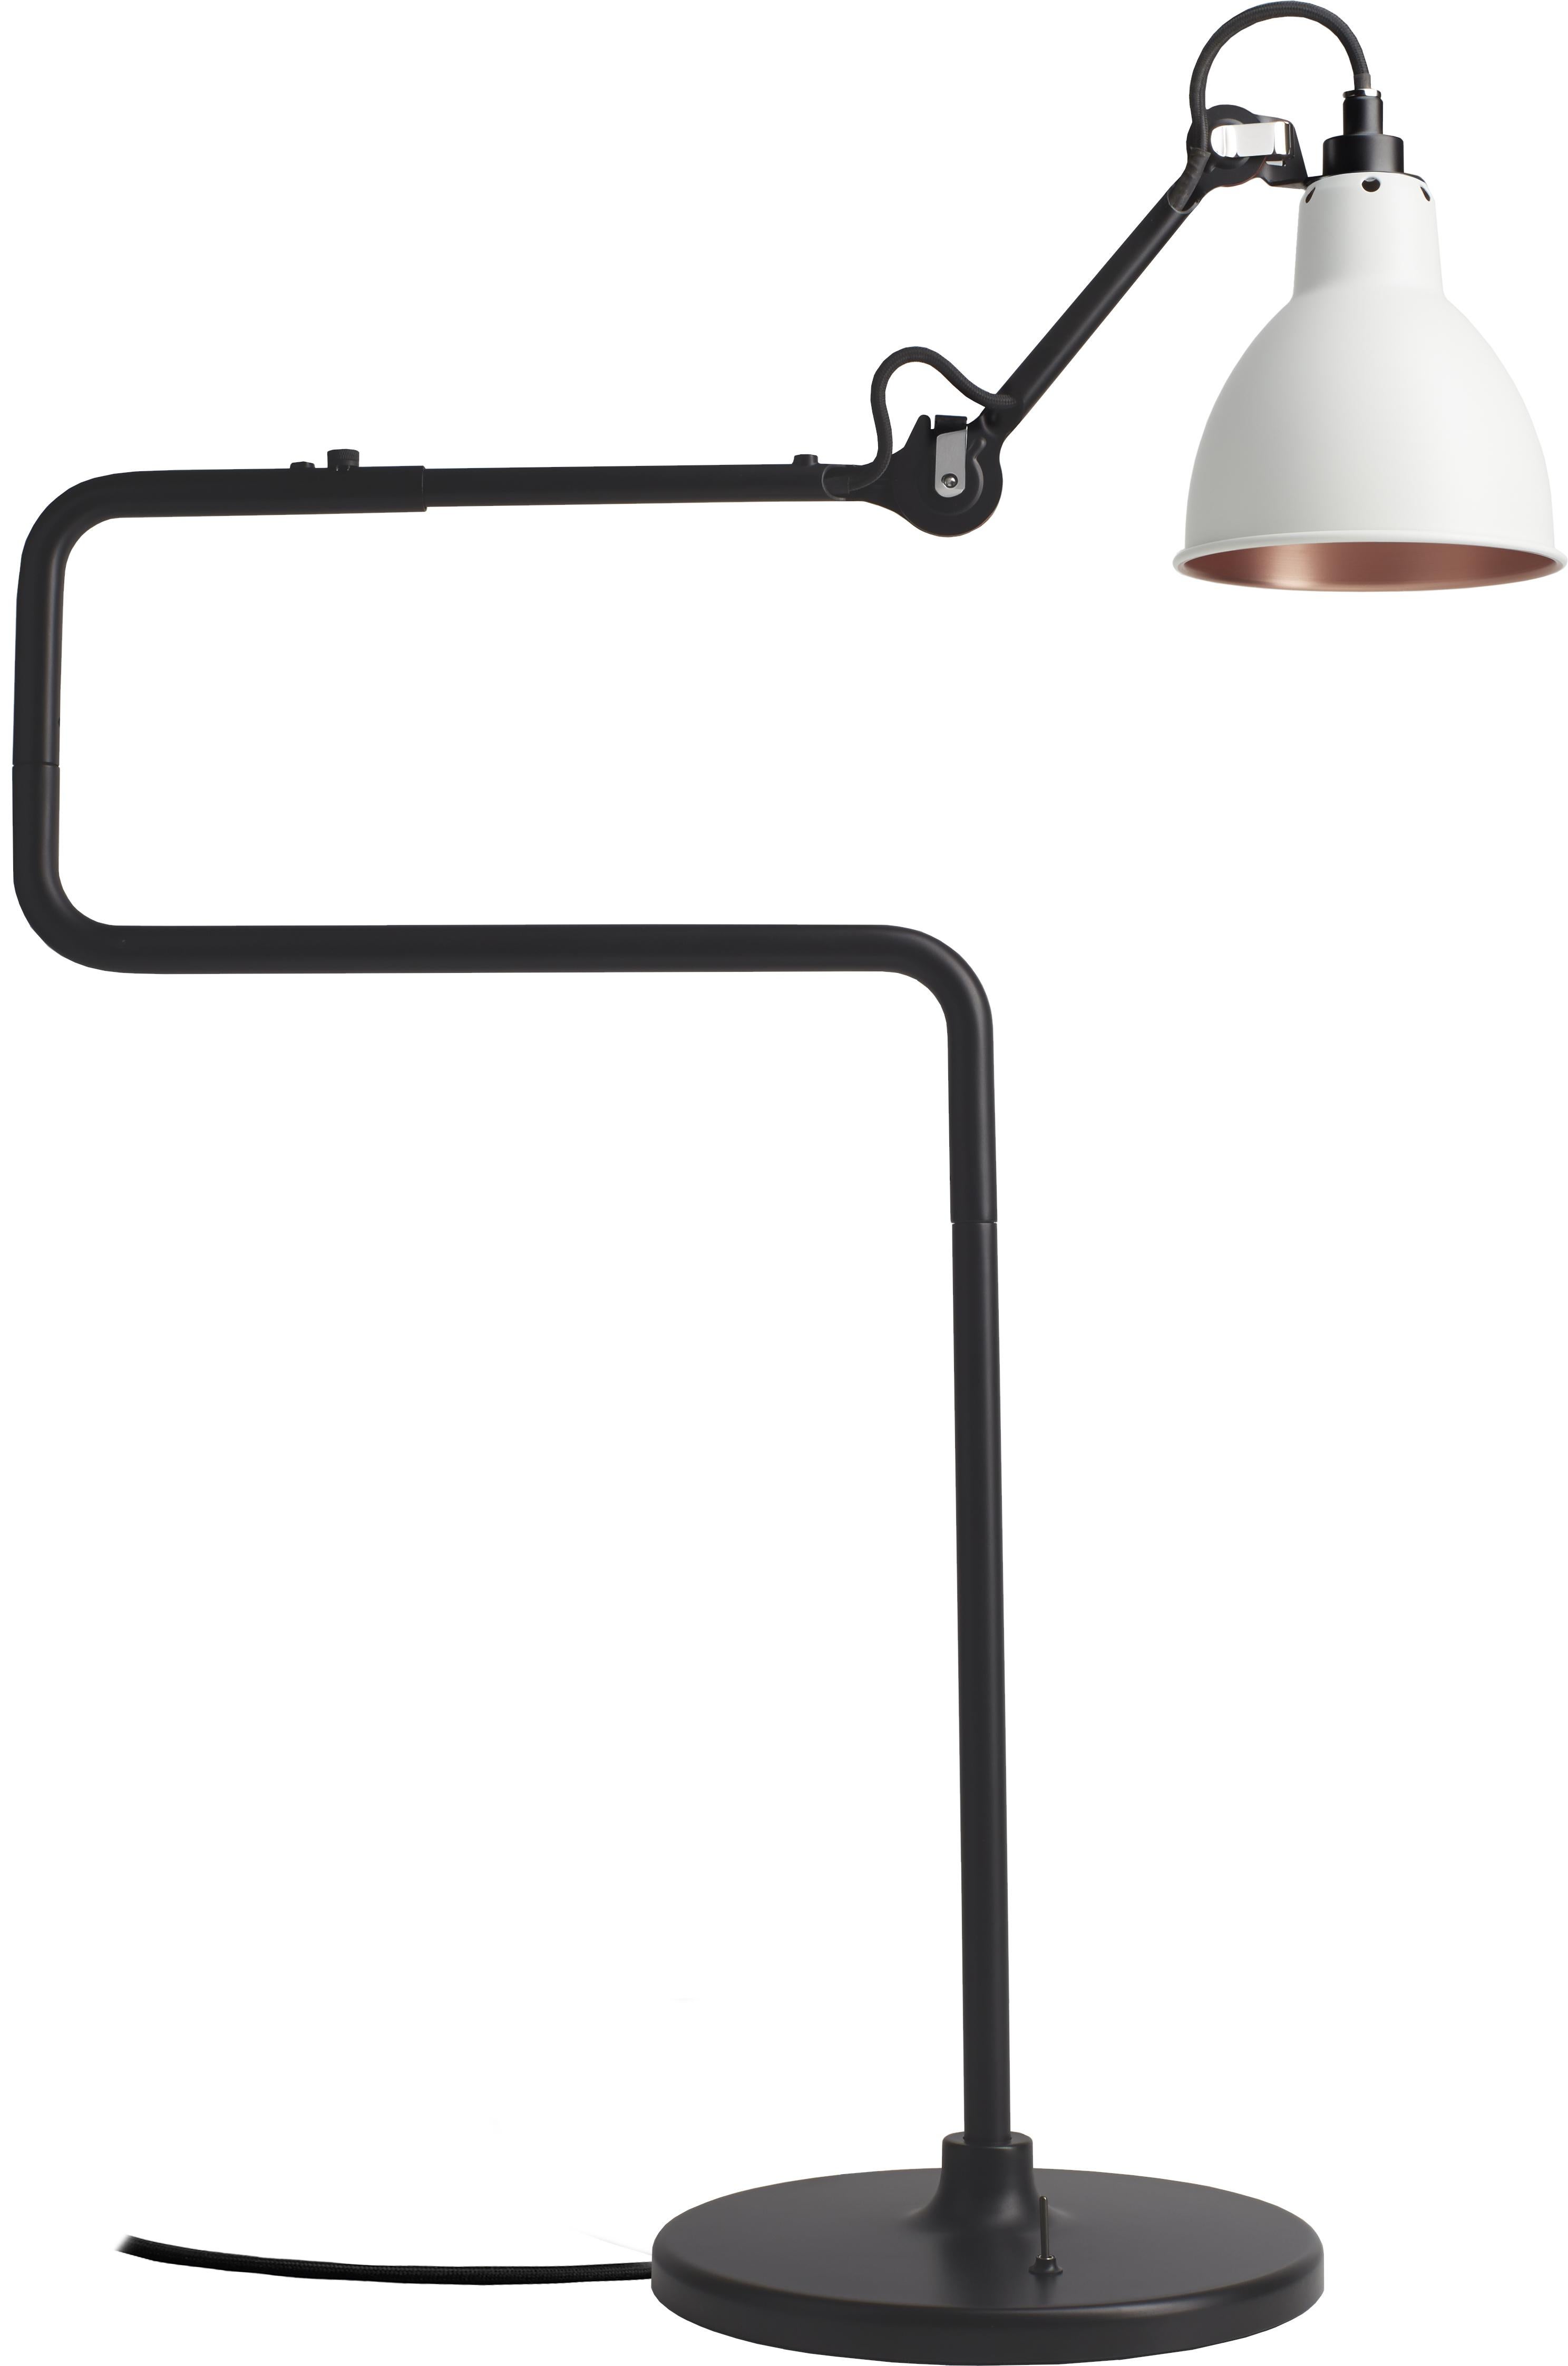 DCW Editions La Lampe Gras N°317 Table Lamp in Black Arm with White Copper Shade For Sale